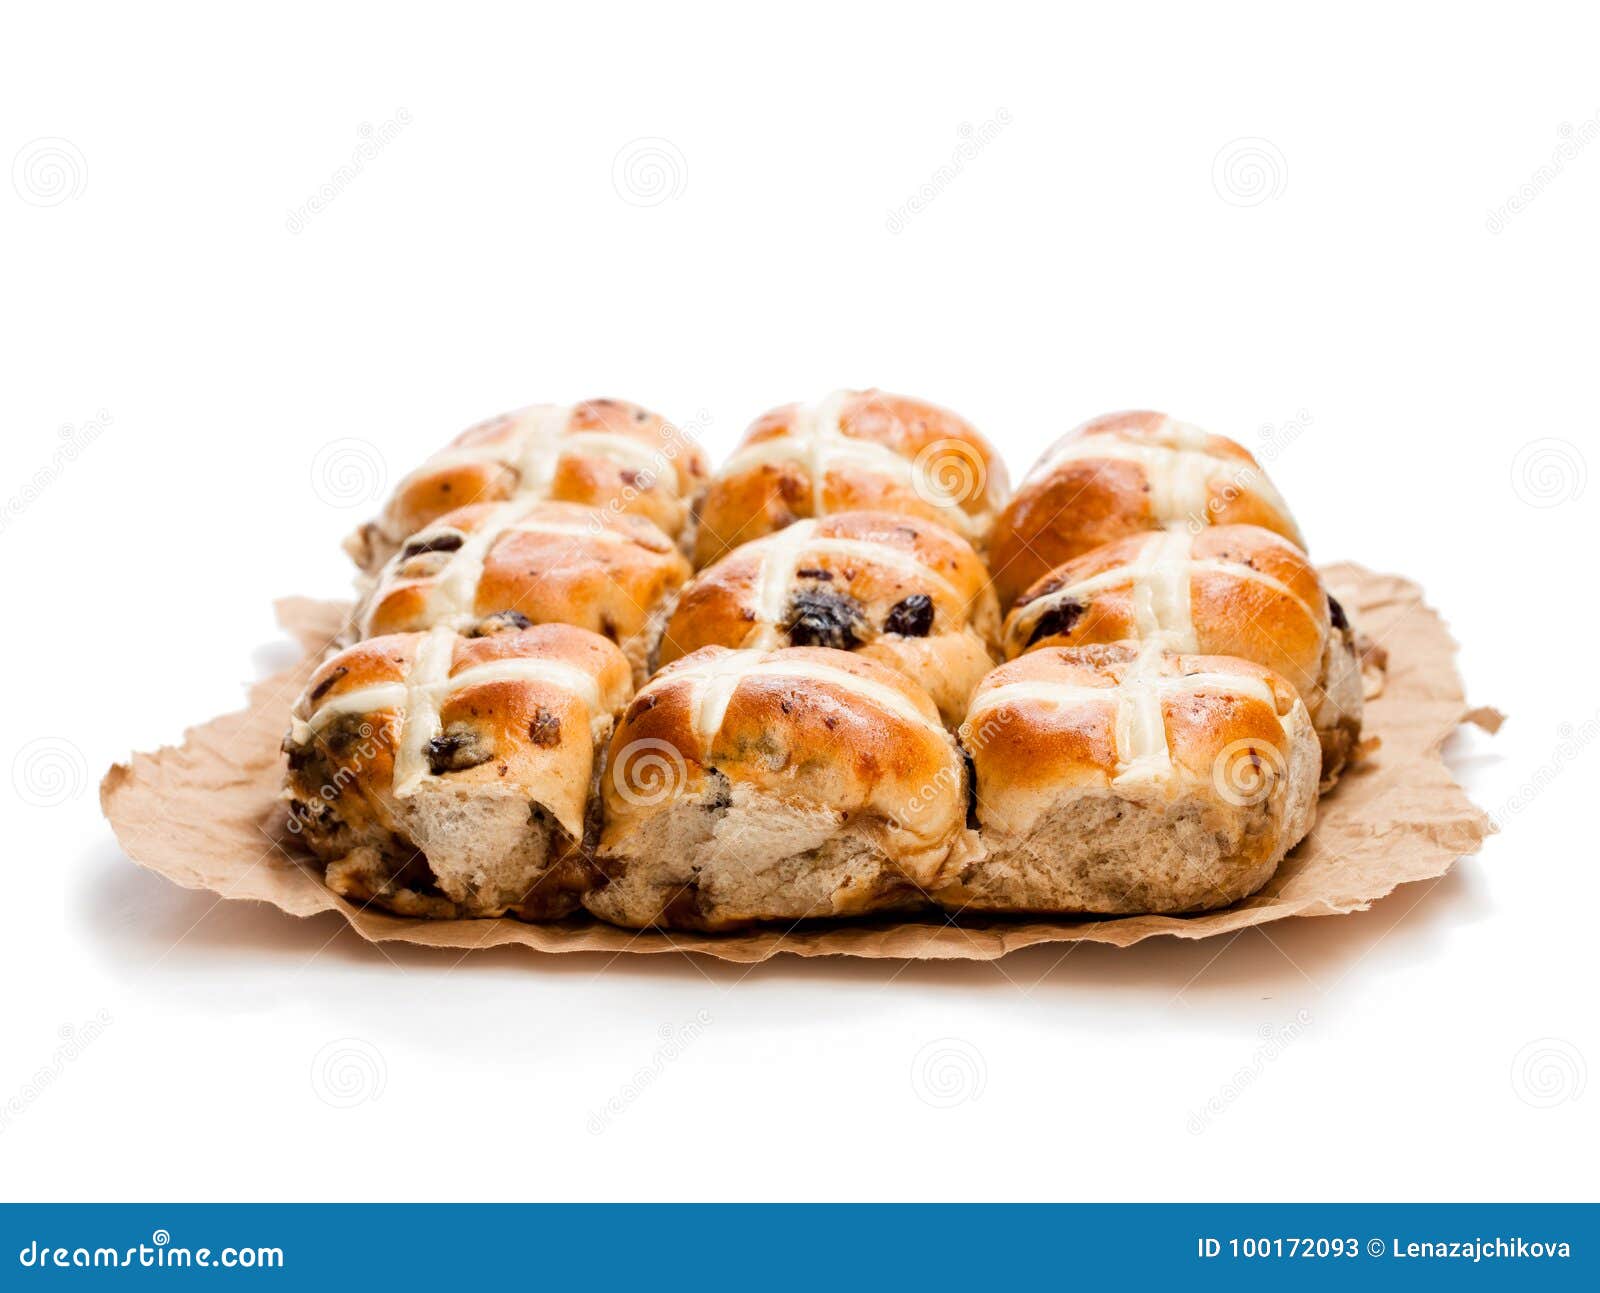 easter cross buns and sultanas  on white background